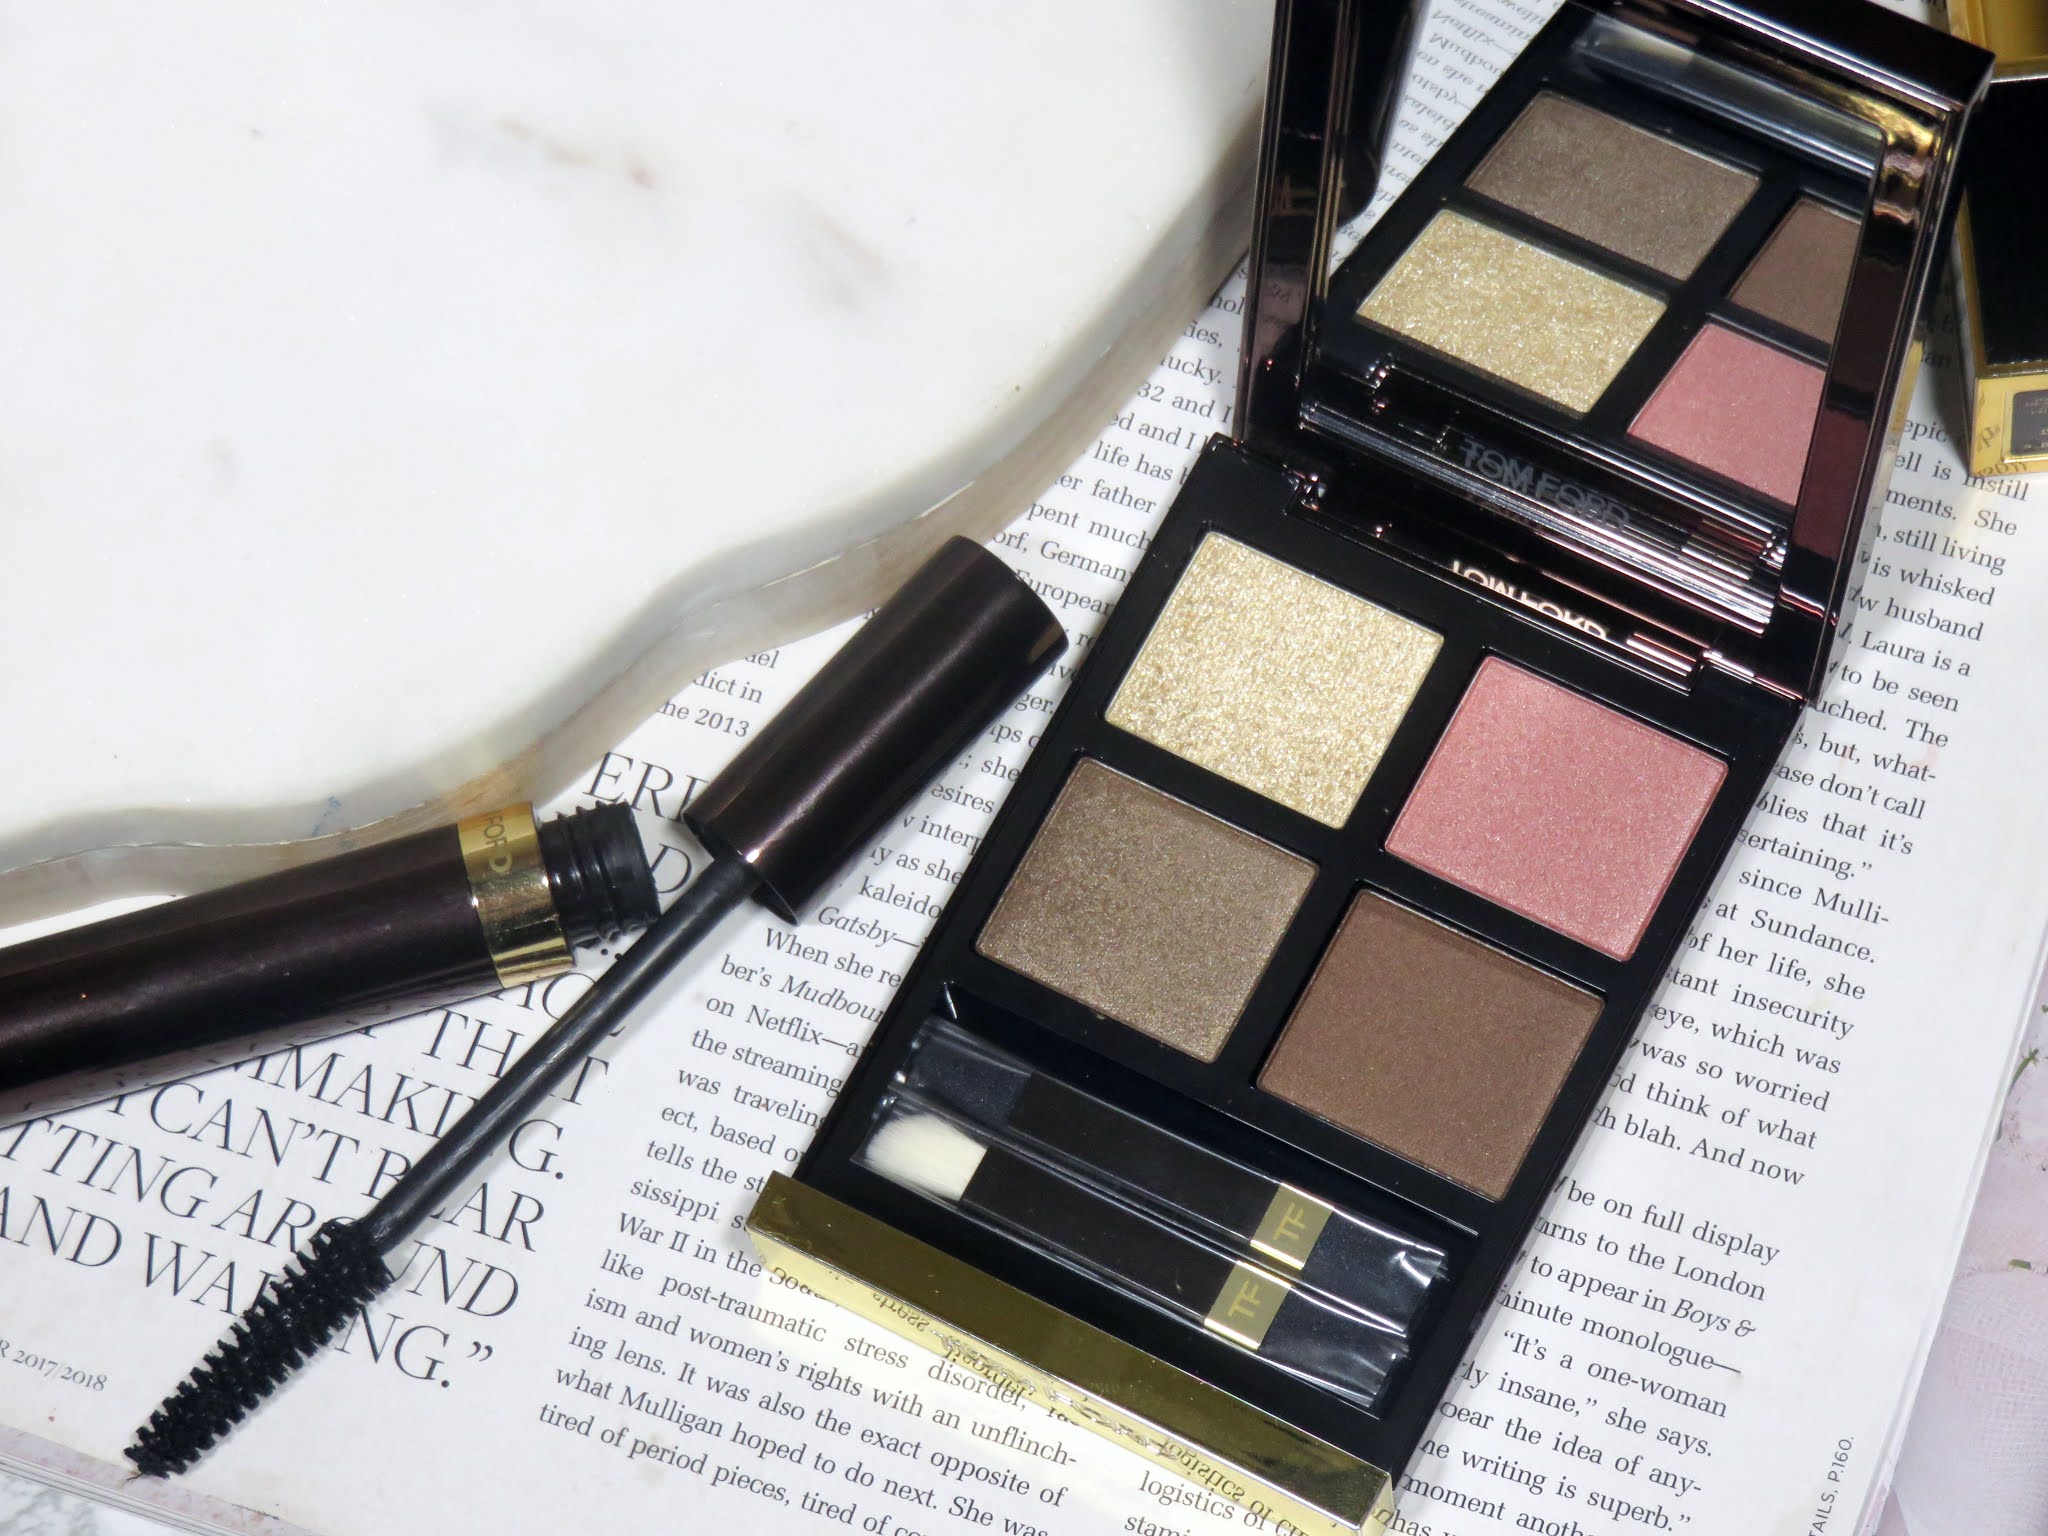 Tom Ford Visionaire Eye Color Quad Review and Swatches